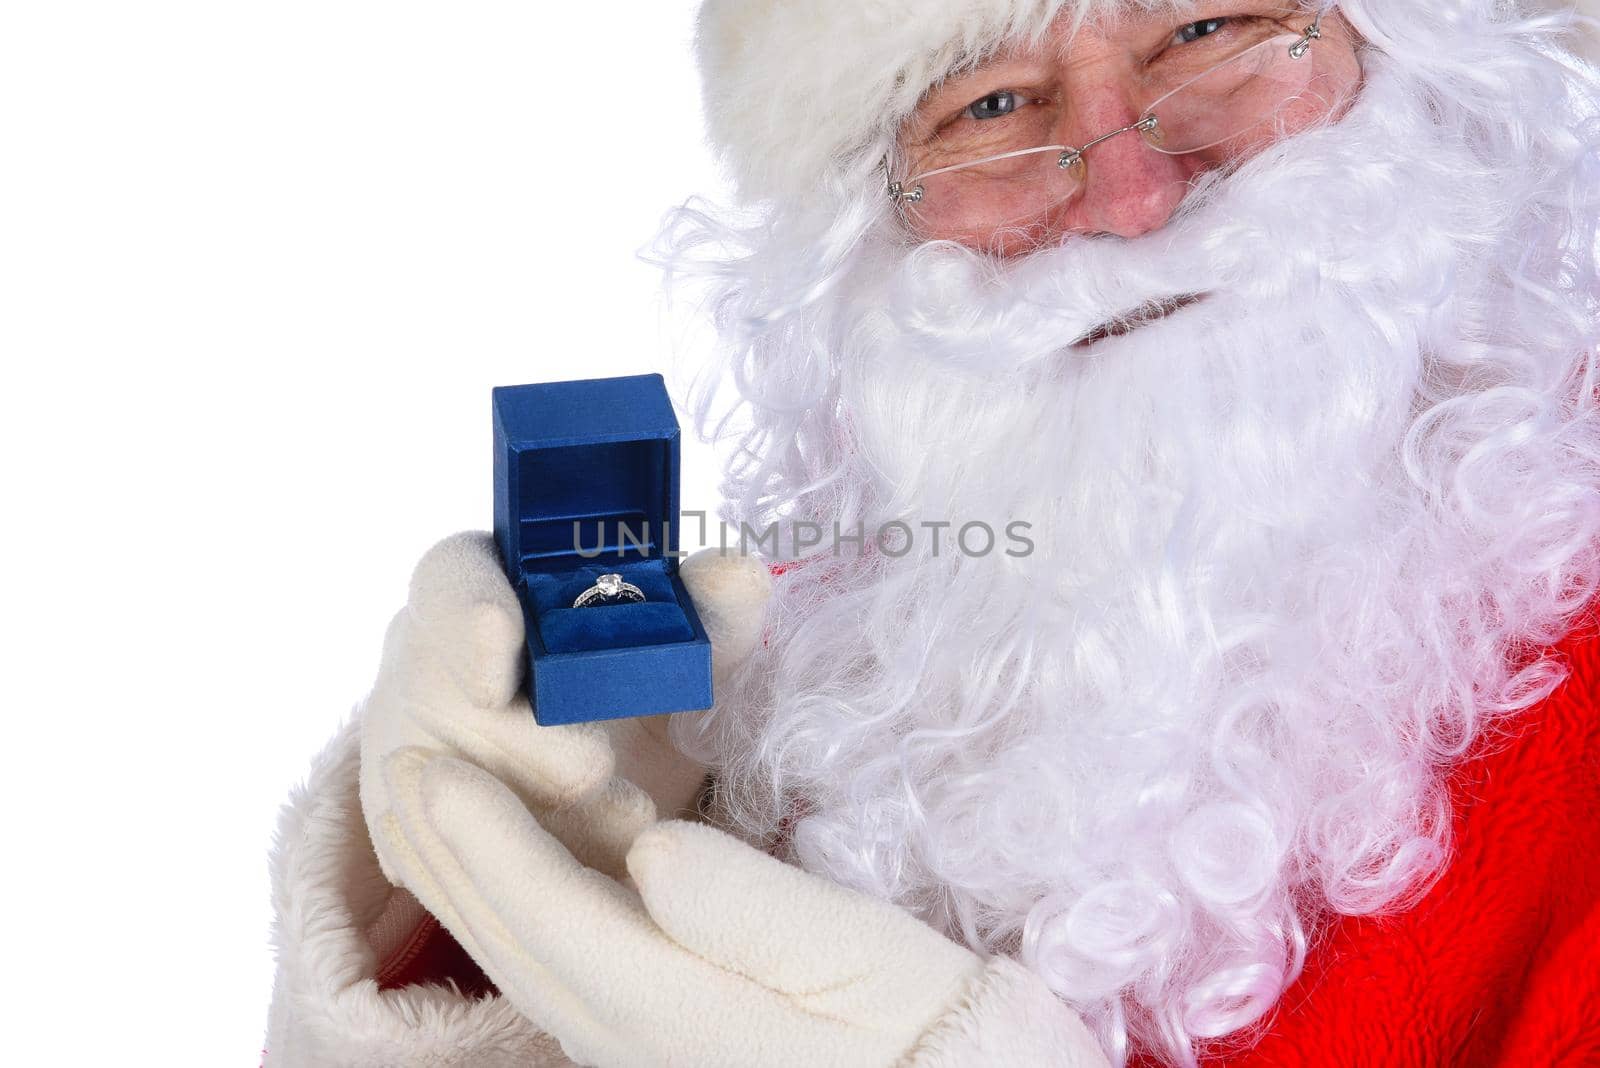 Santa Claus holding a diamond engagement ring in a blue box closeup next to his face.